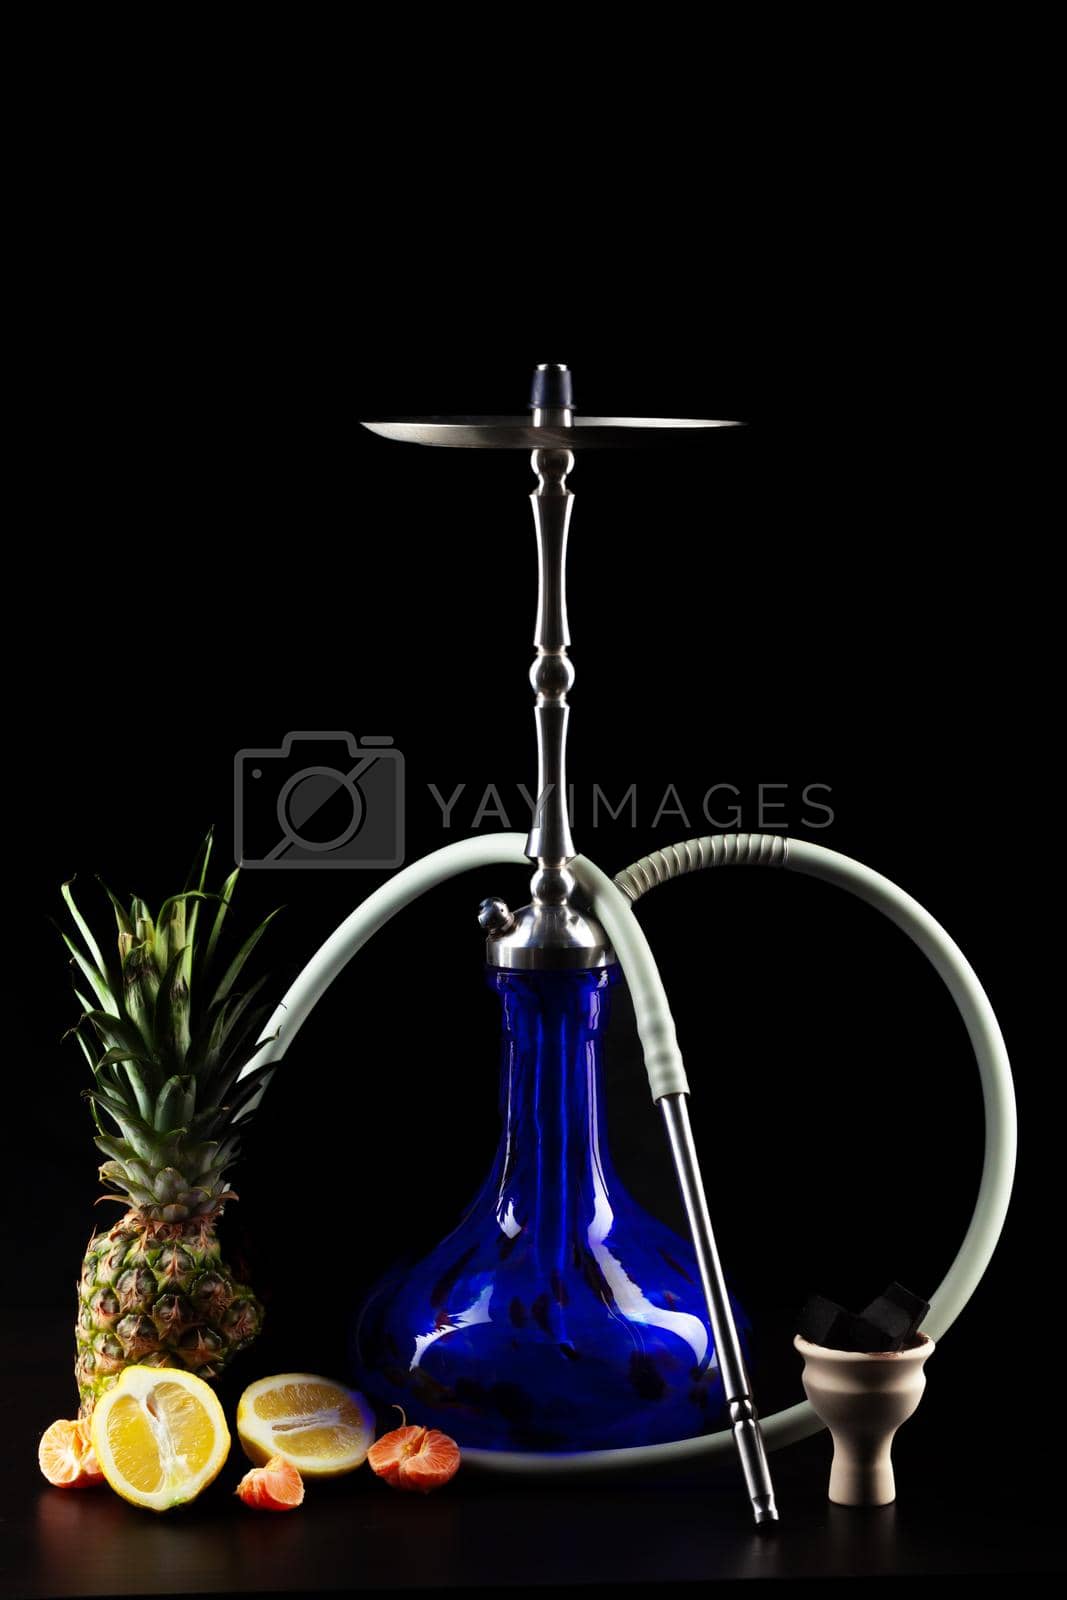 Royalty free image of Fruit flavor hookah isolated on black background by Fabrikasimf